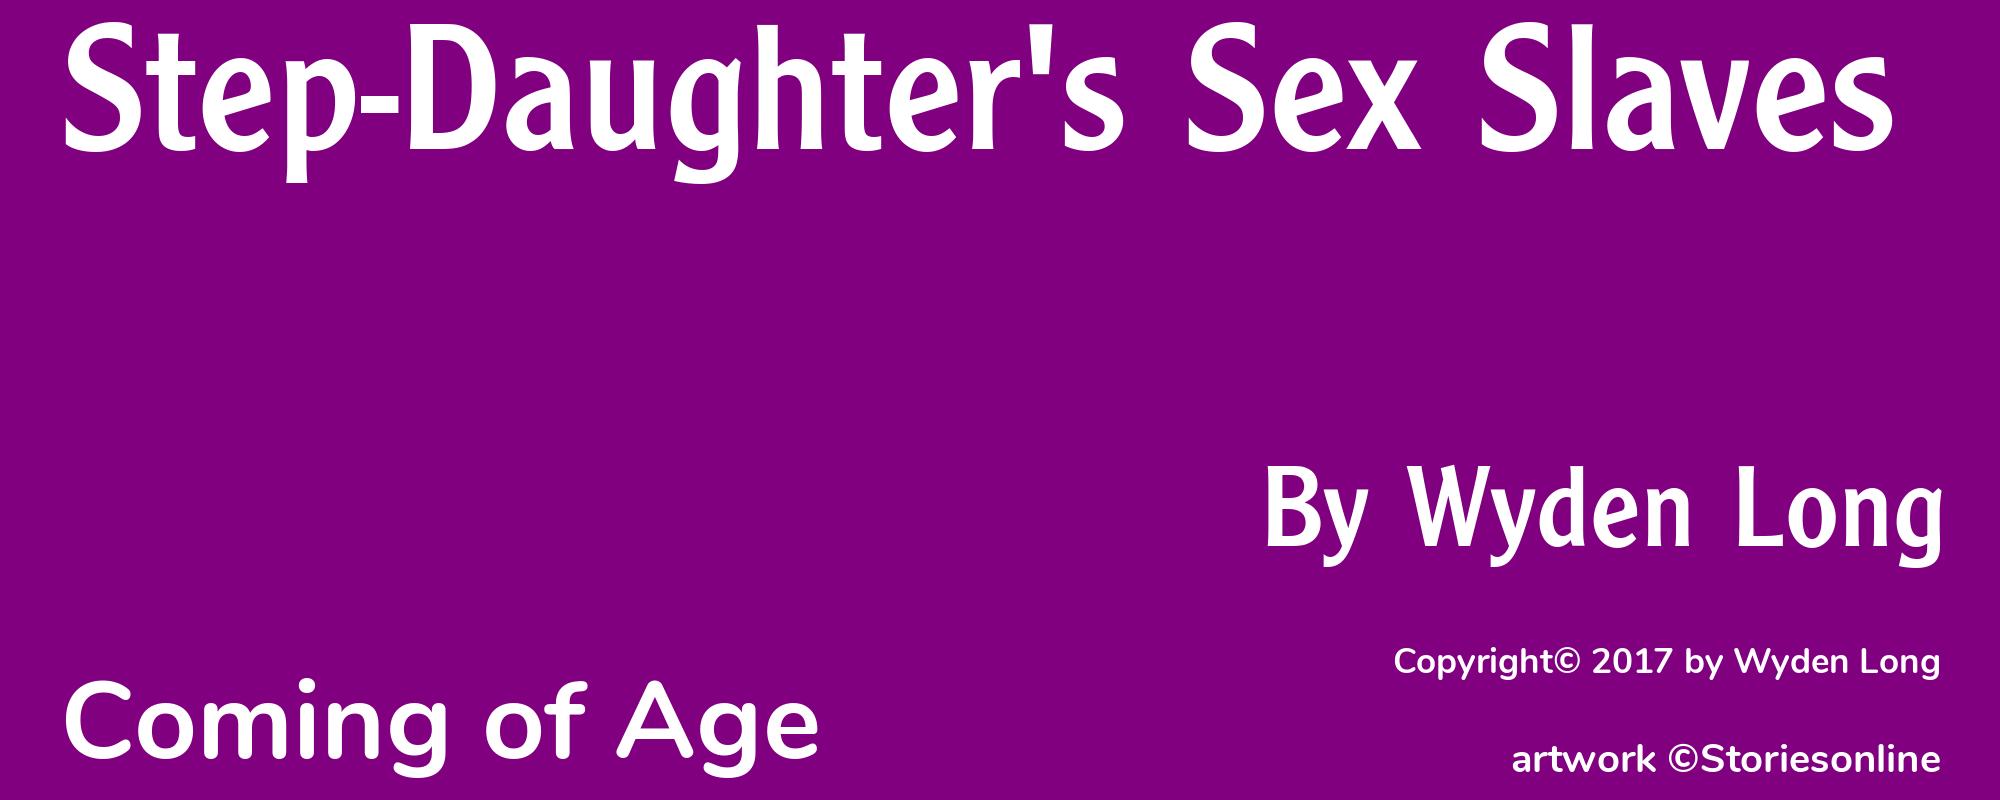 Step-Daughter's Sex Slaves - Cover